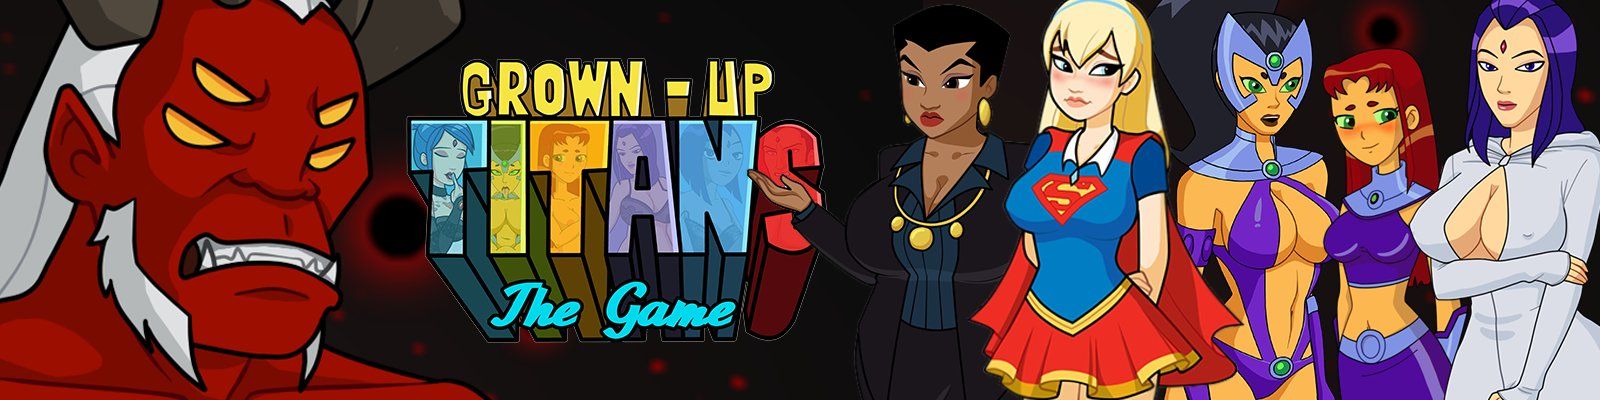 Grown Up Titans Apk Android Download (8)